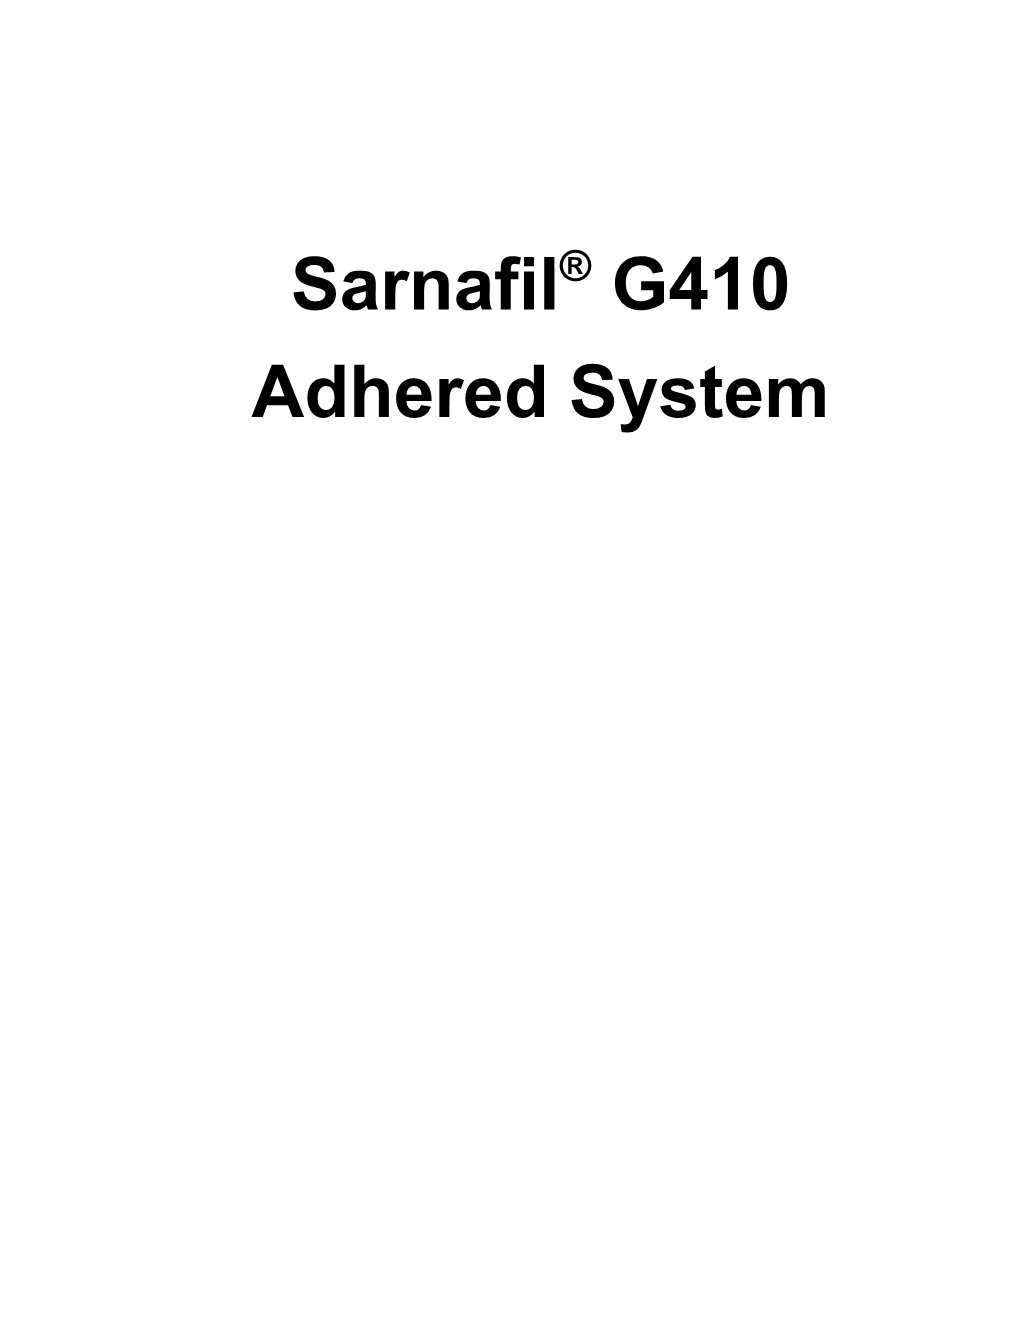 Sarnafil Adhered Guide Specification